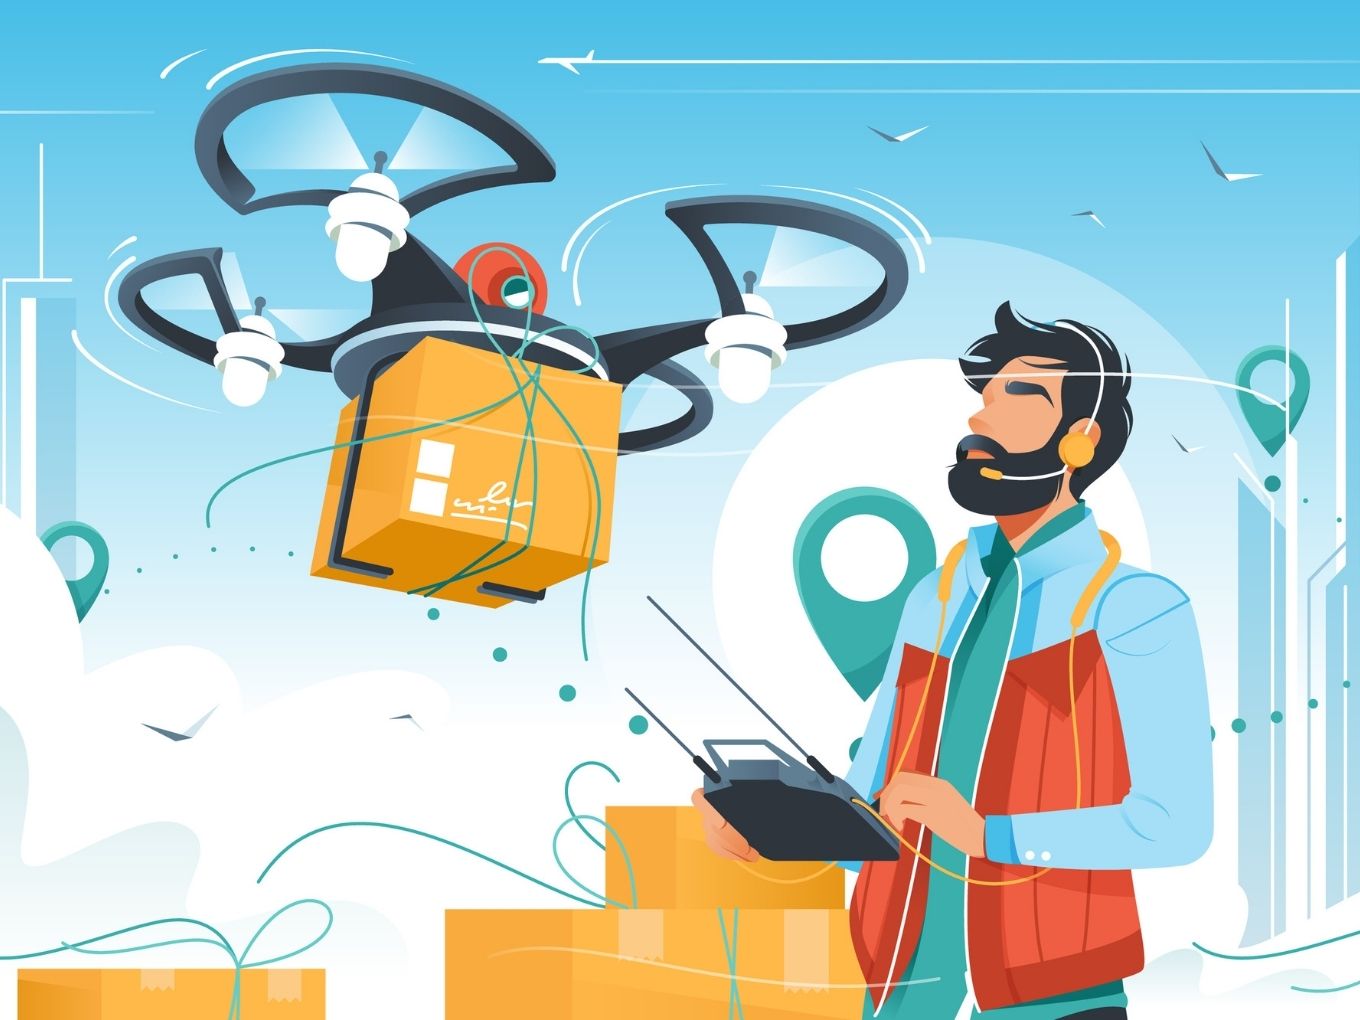 Game Of Drones: Zomato & Dunzo Ready For Aerial Deliveries, Swiggy Might Join Soon